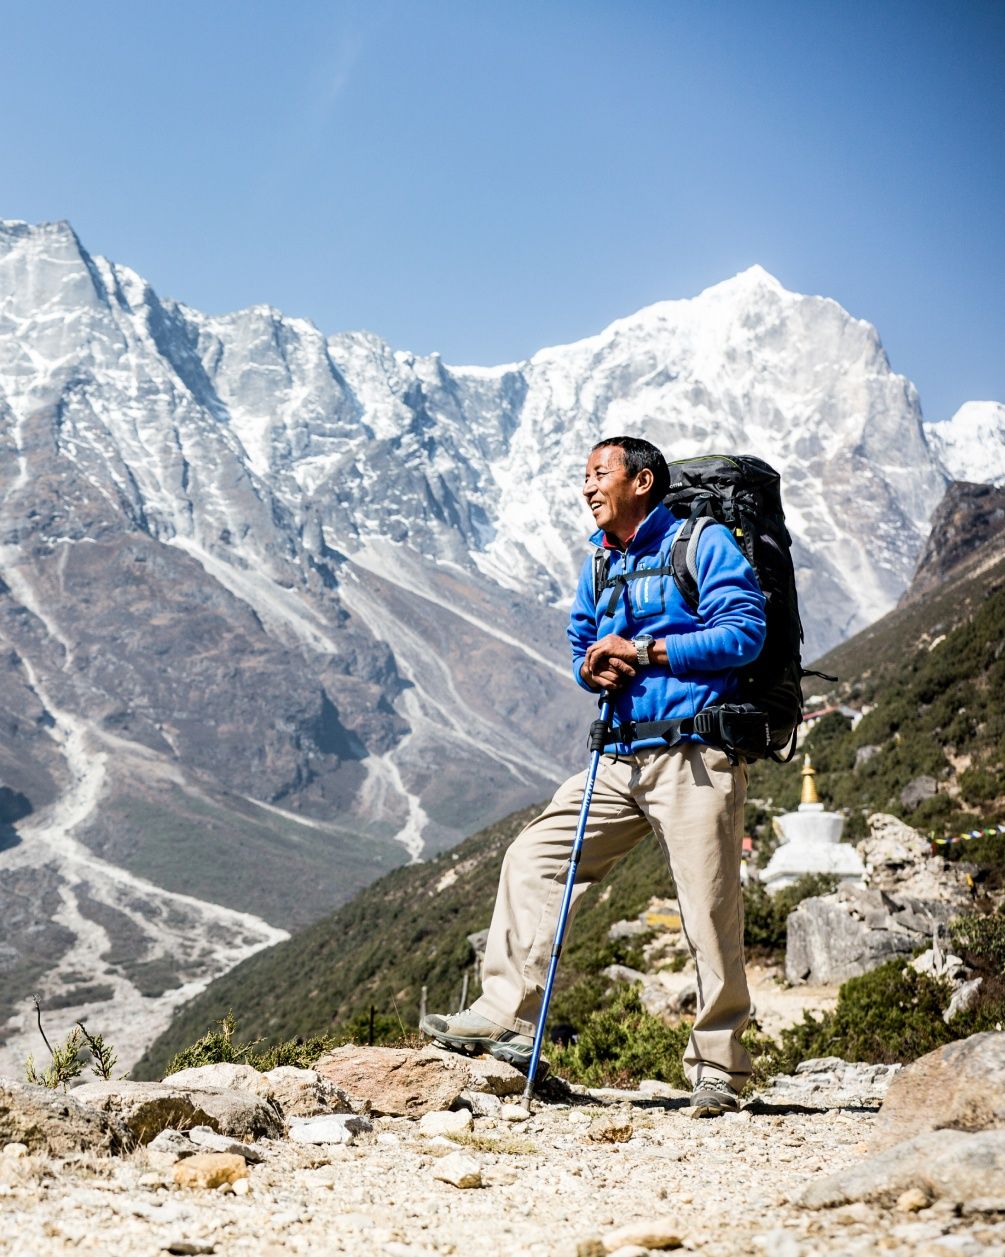 Apa Sherpa smiles while hiking with tall mountains in the background.